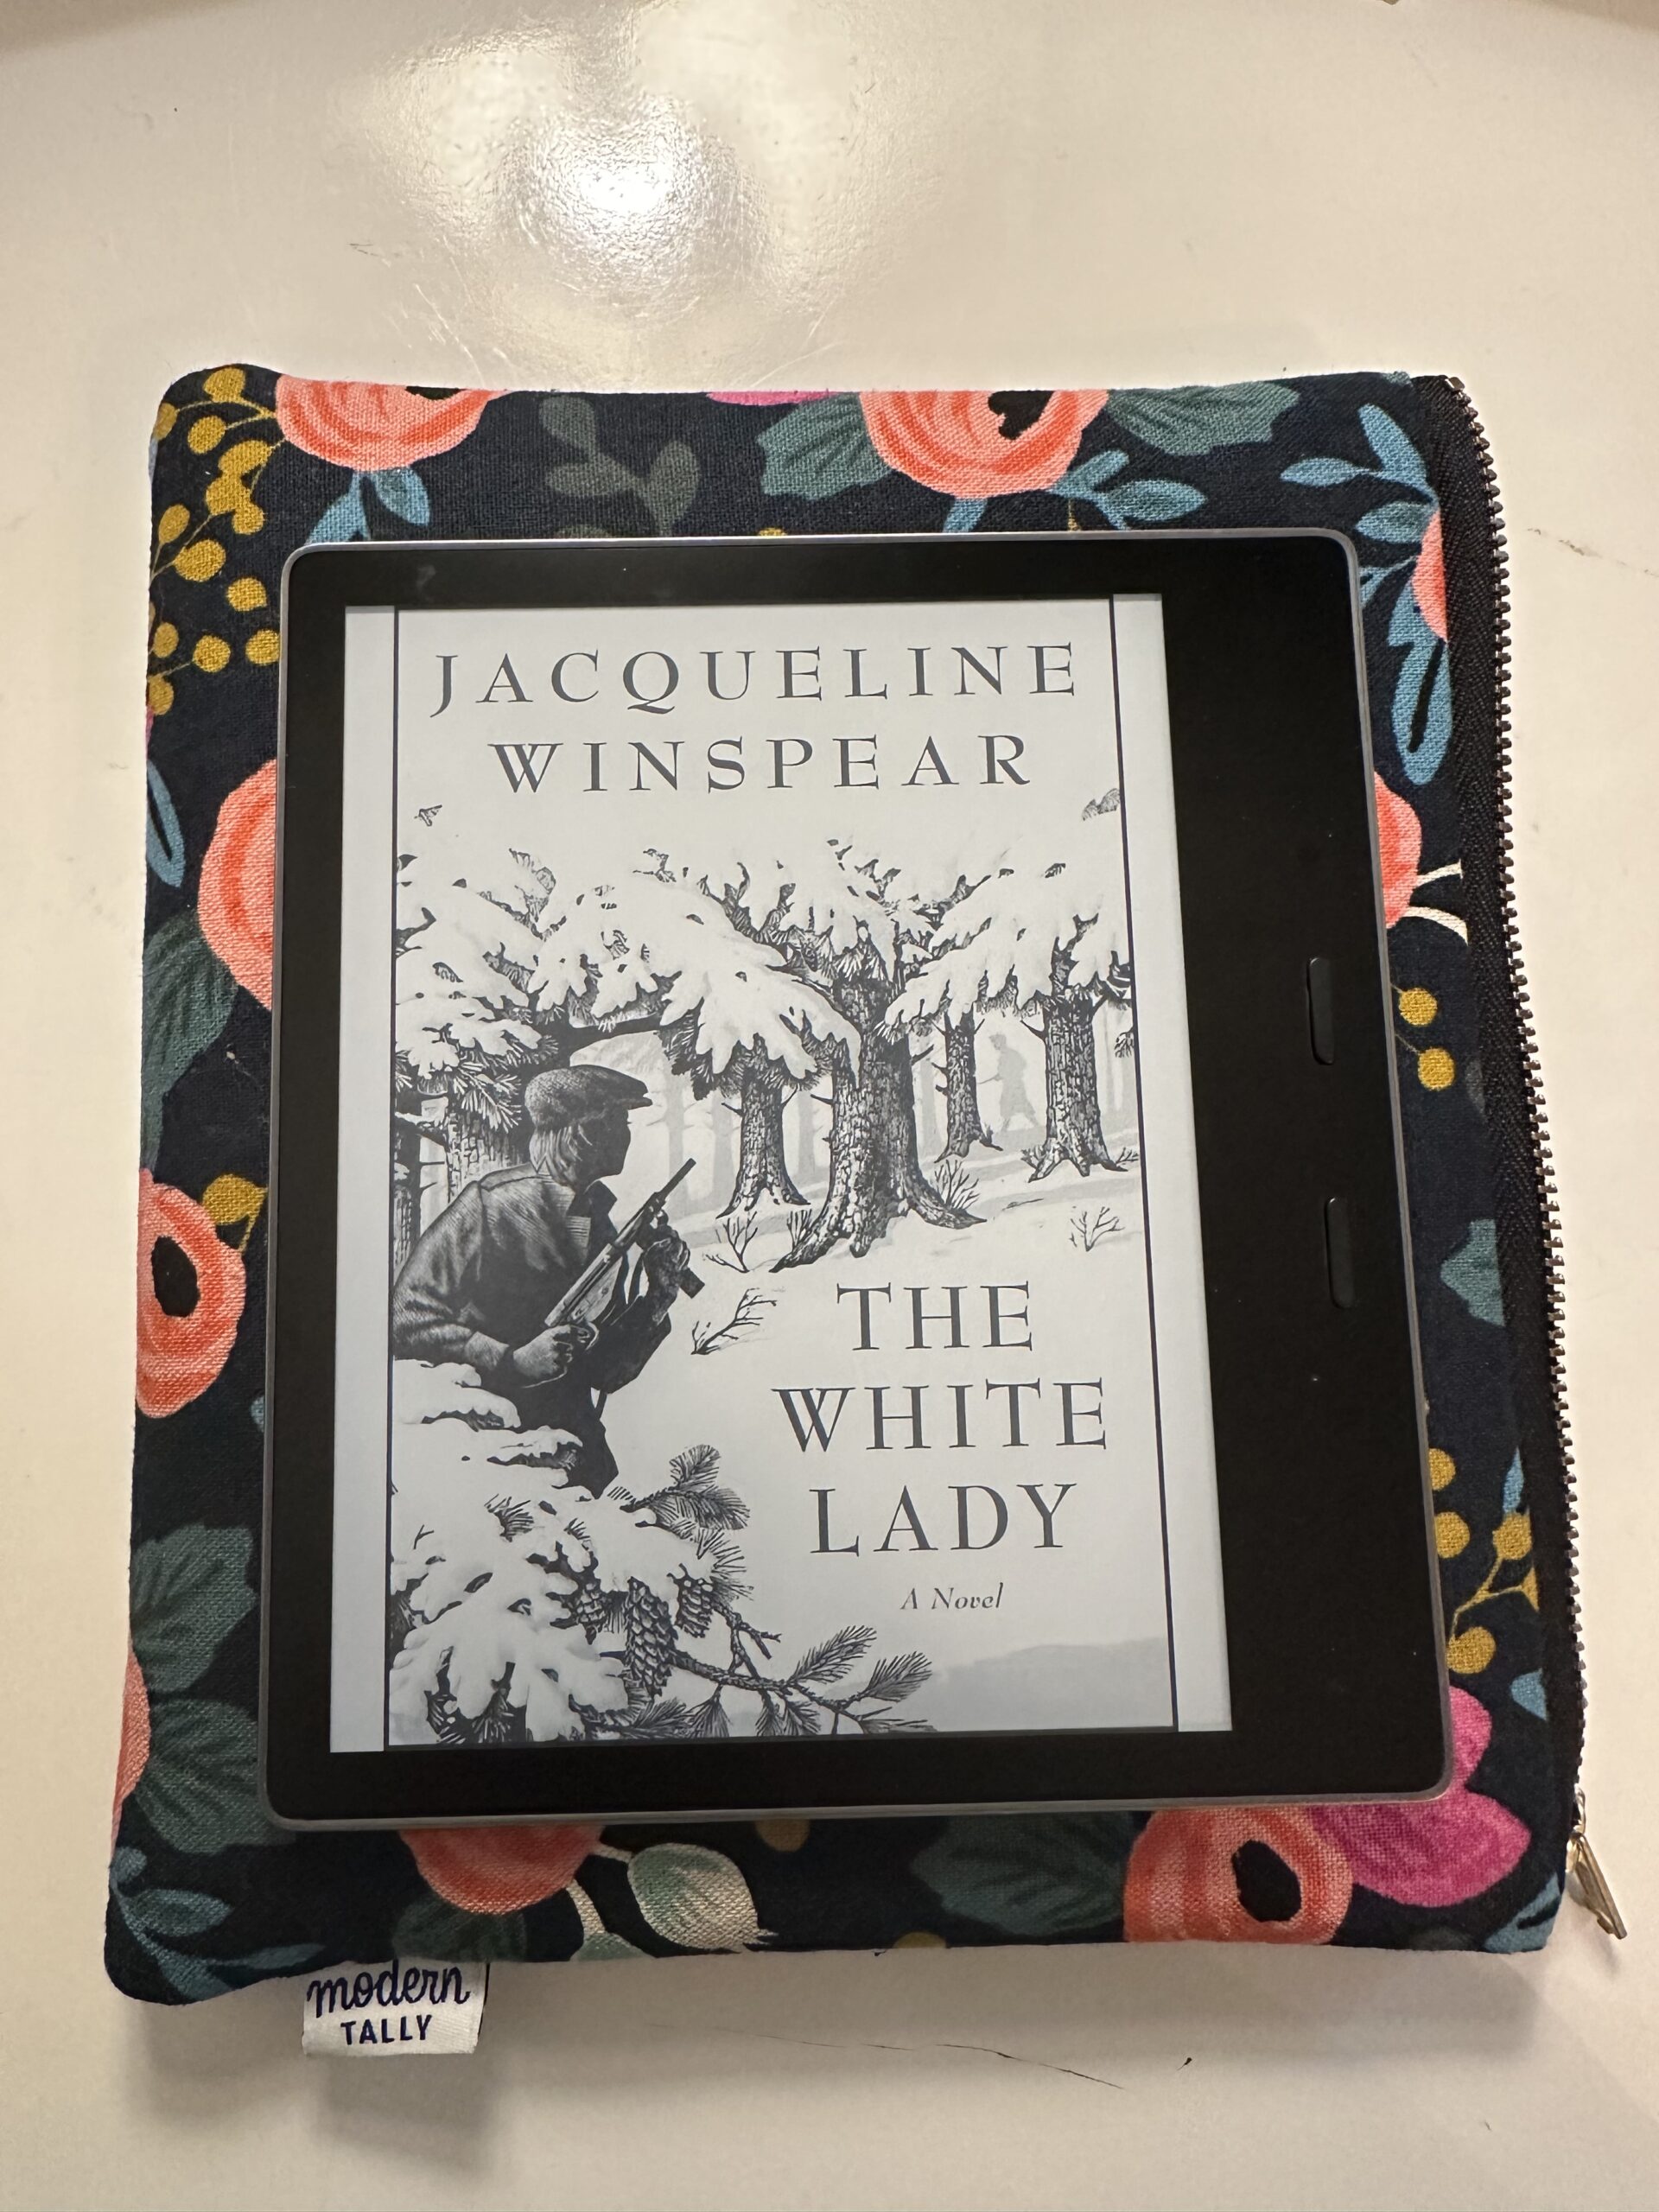 The White Lady by Jacqueline Winspear